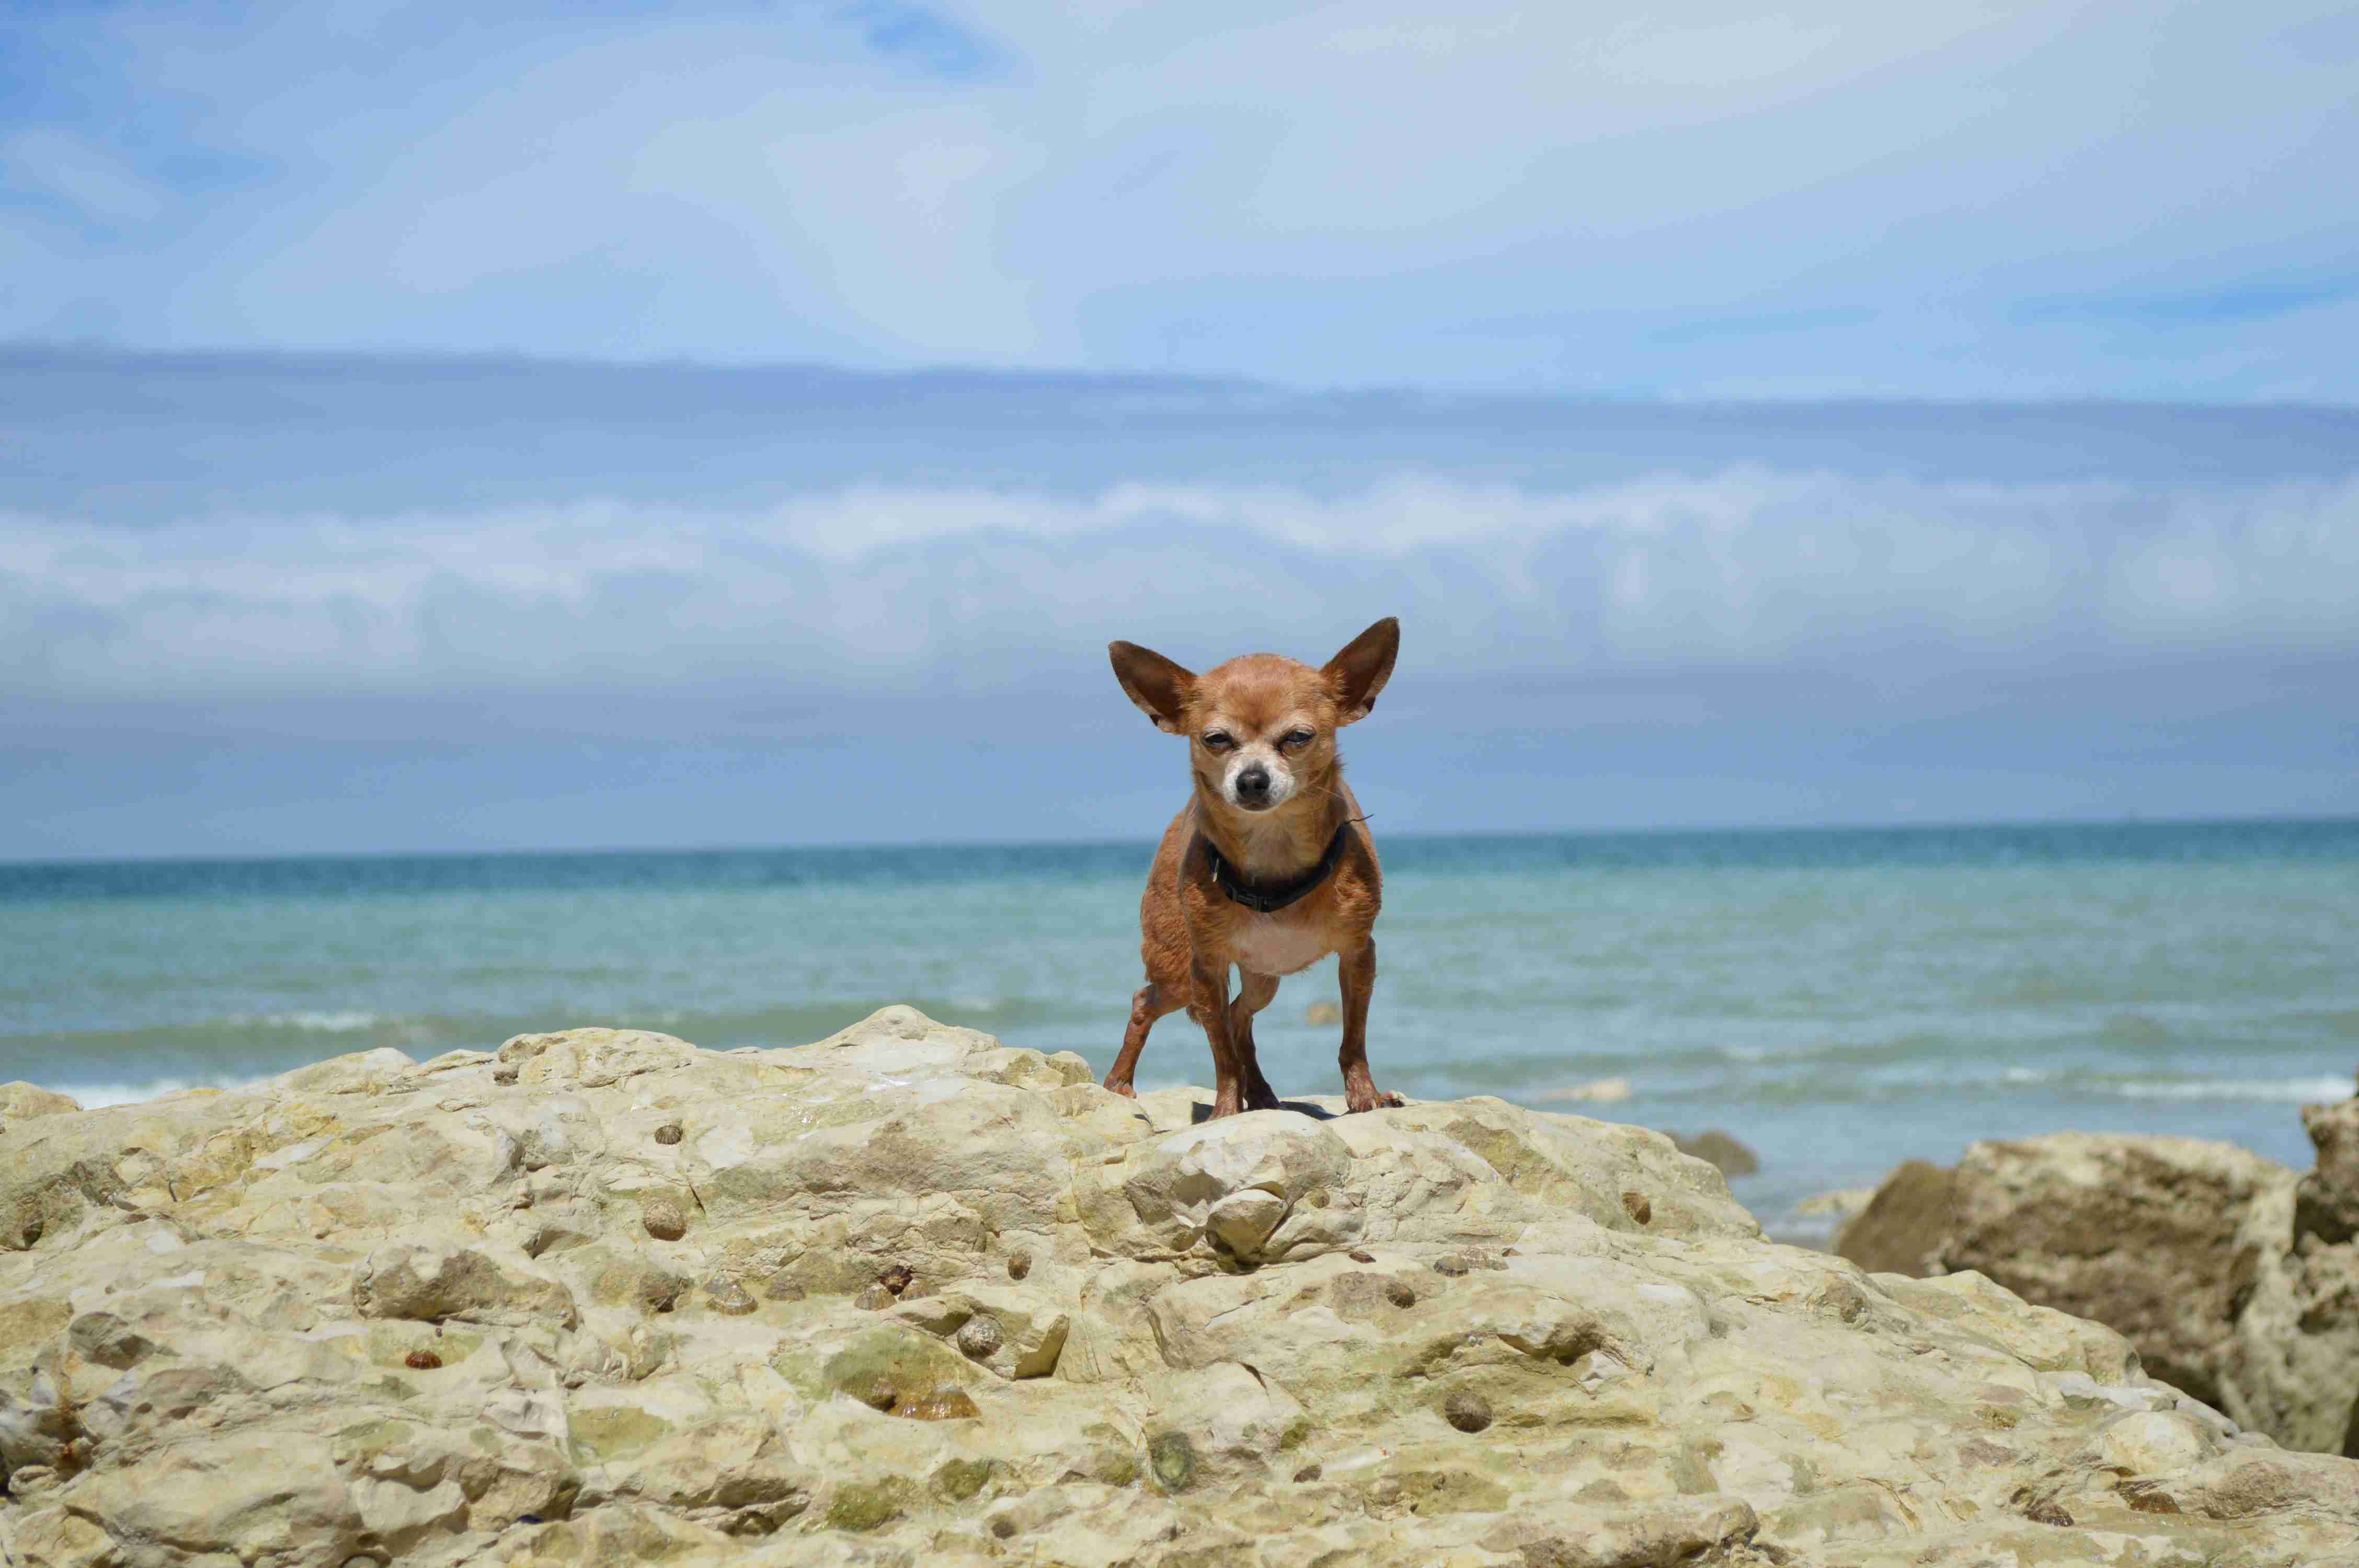 What are some effective ways to redirect a Chihuahua's focus when they are feeling angry?